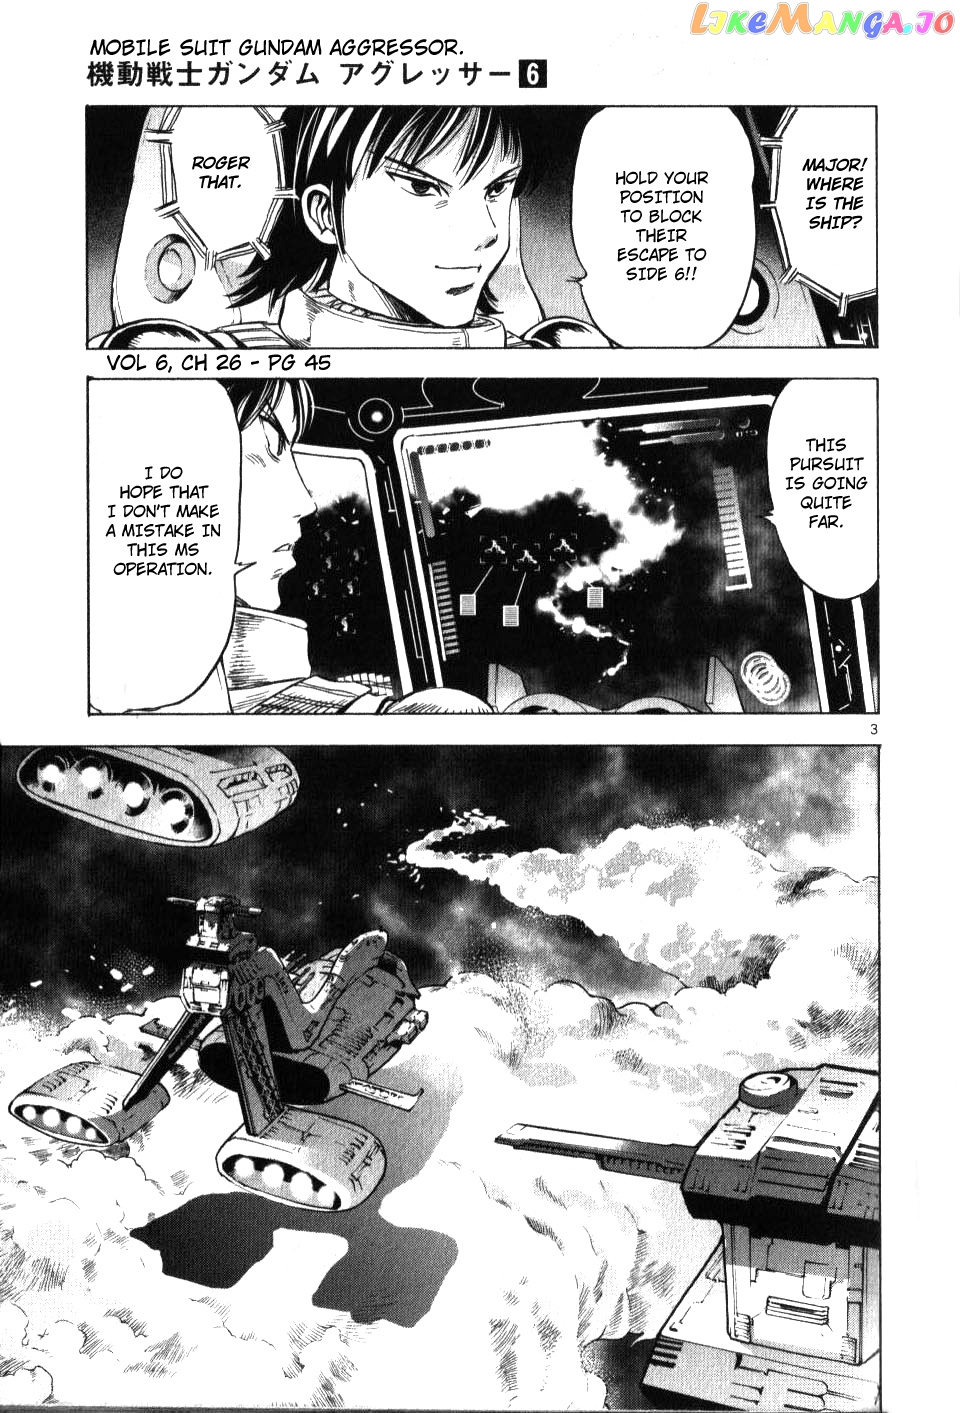 Mobile Suit Gundam Aggressor chapter 26 - page 3